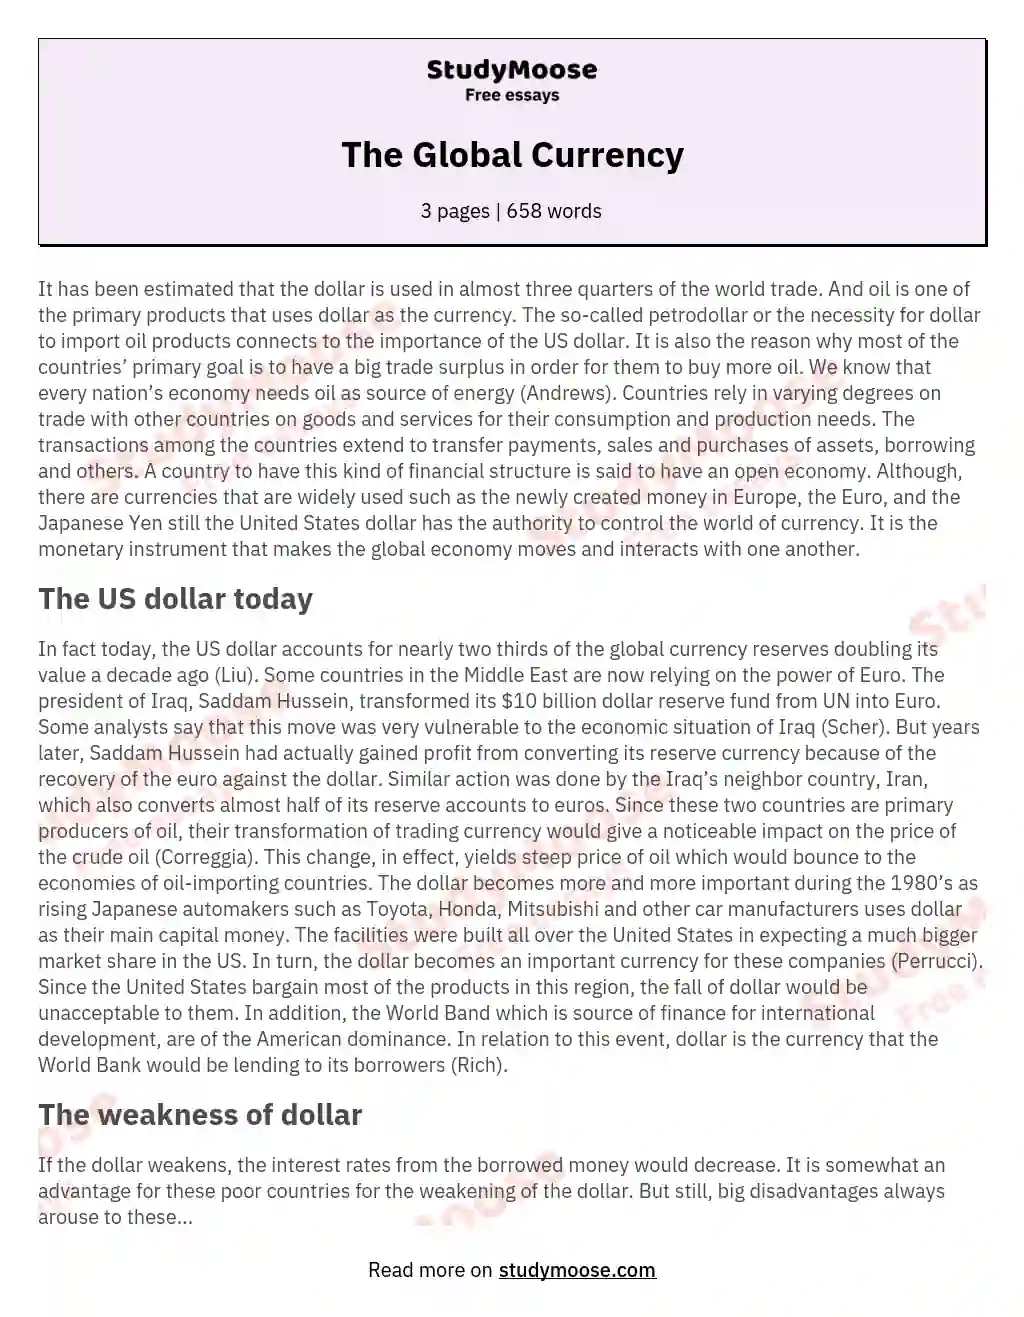 The Global Currency essay